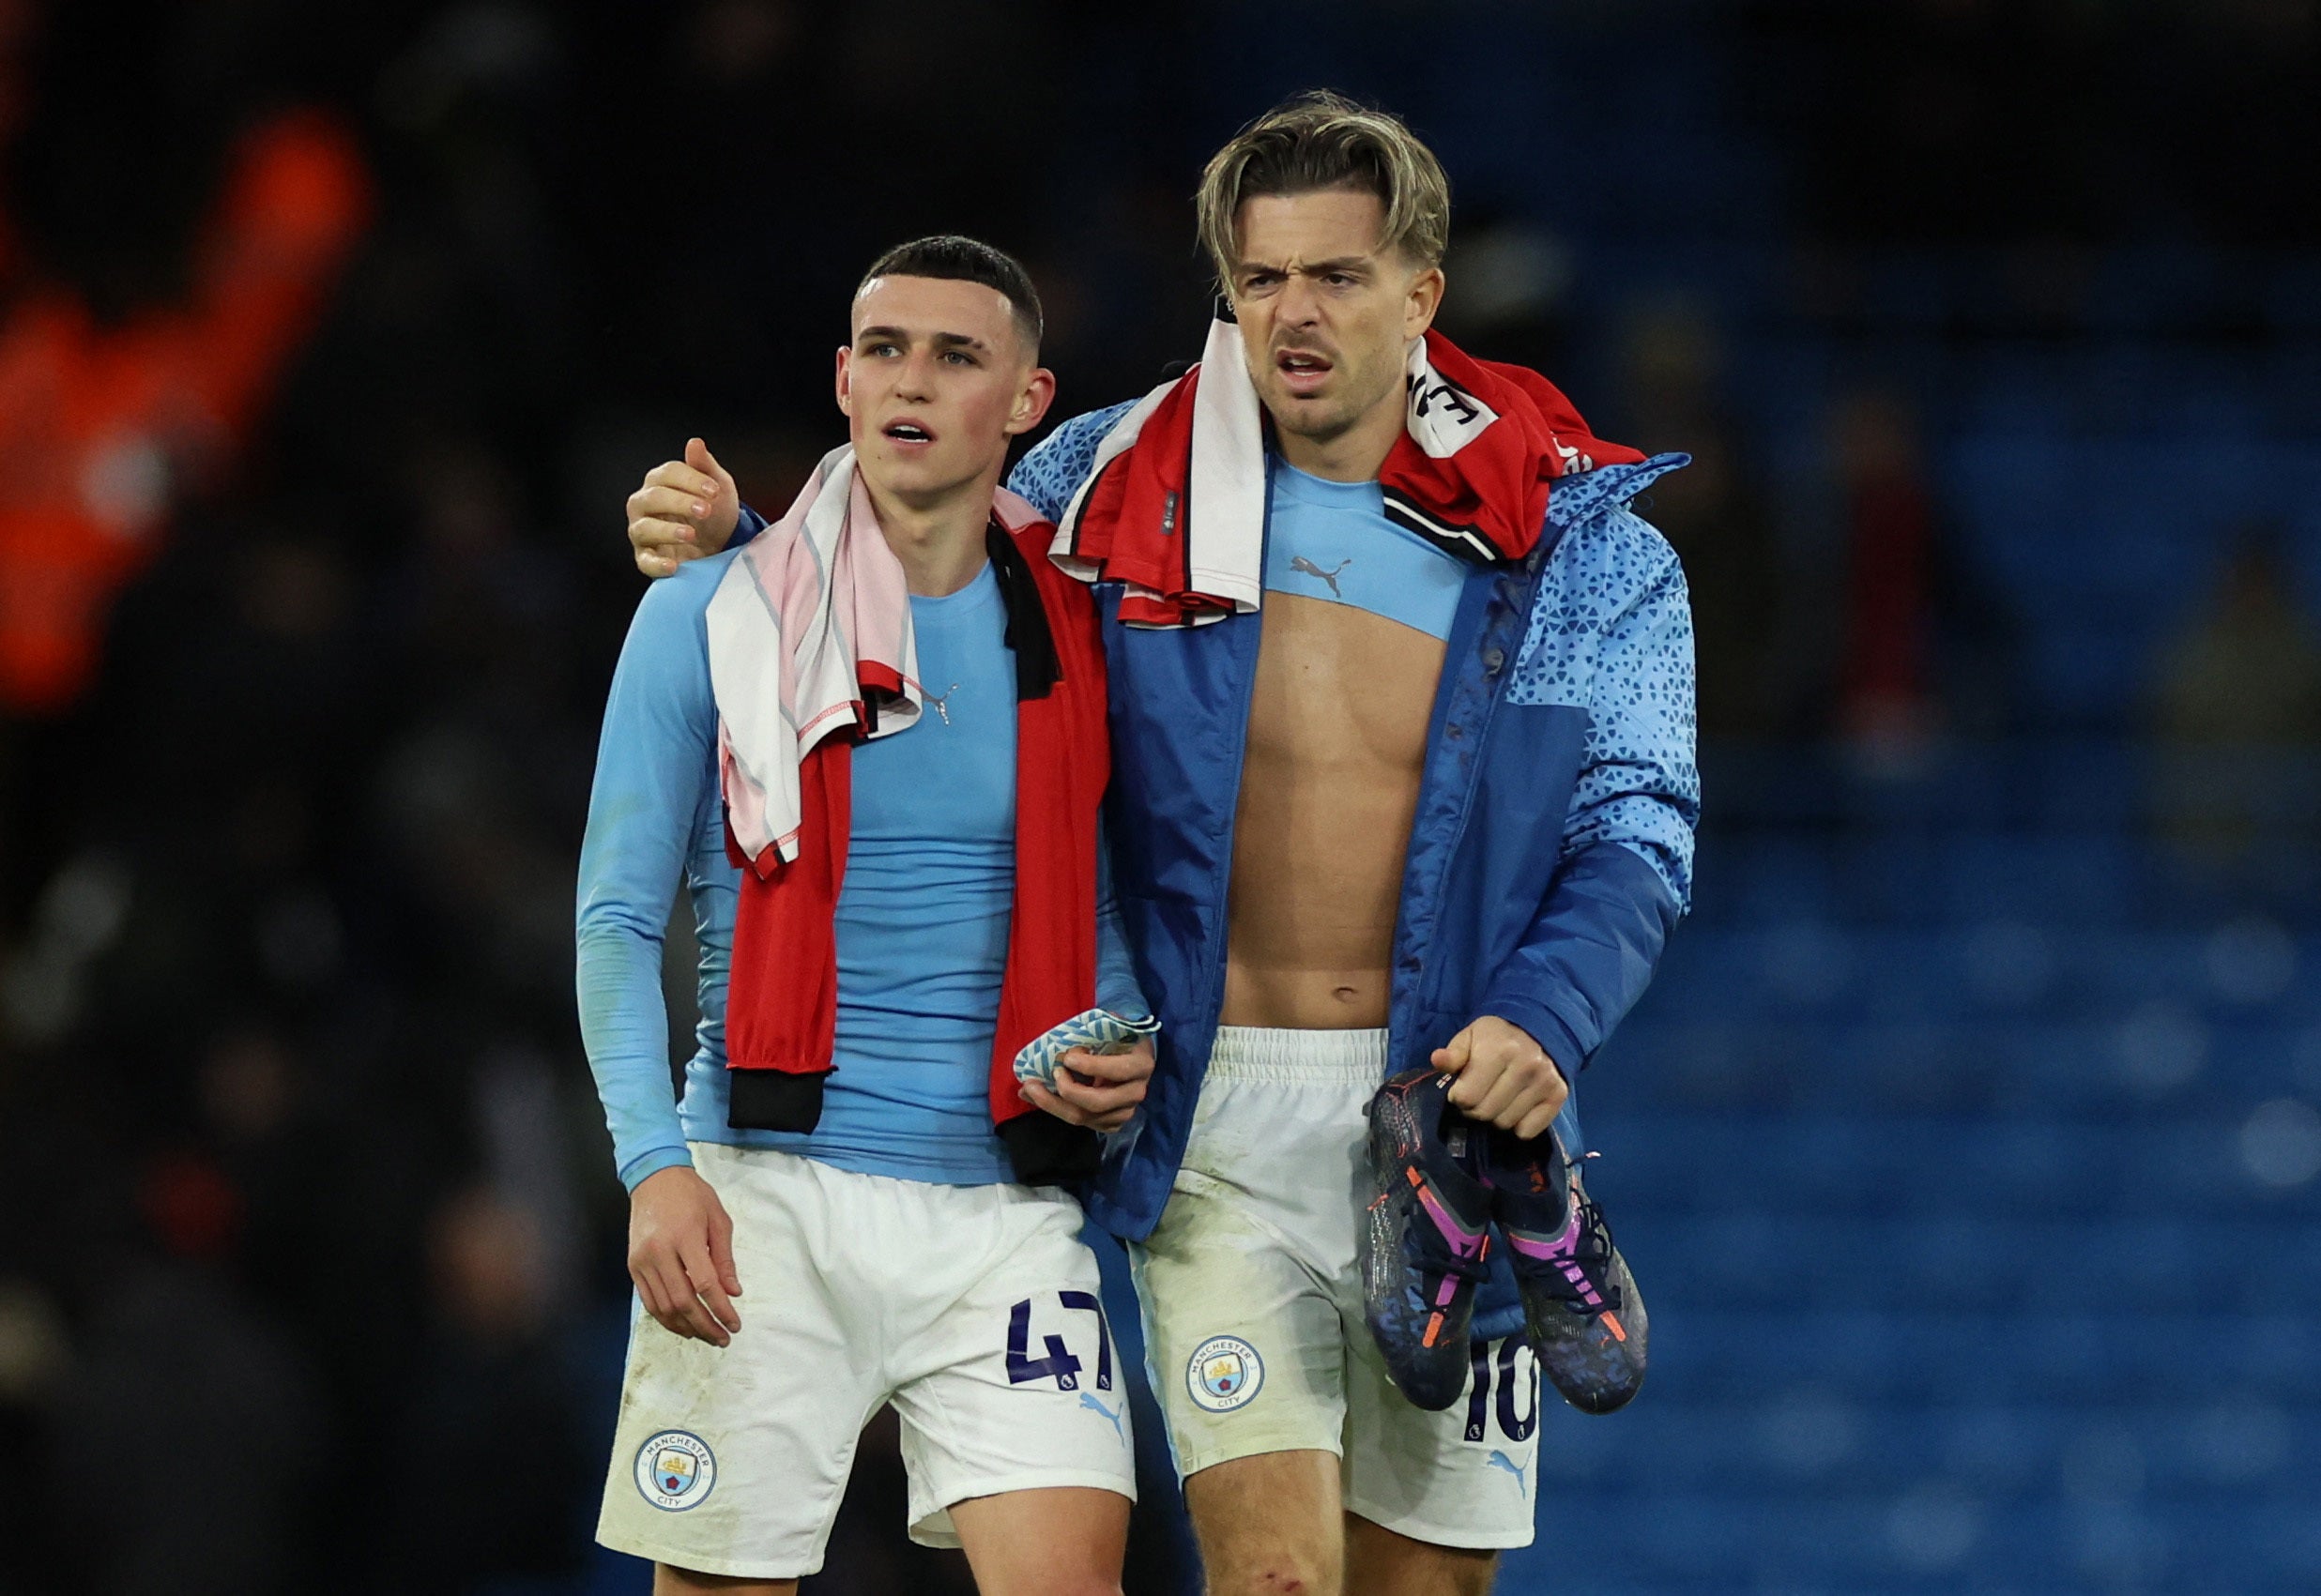 Manchester City's Phil Foden and Jack Grealish celebrate after the Sheffield United match